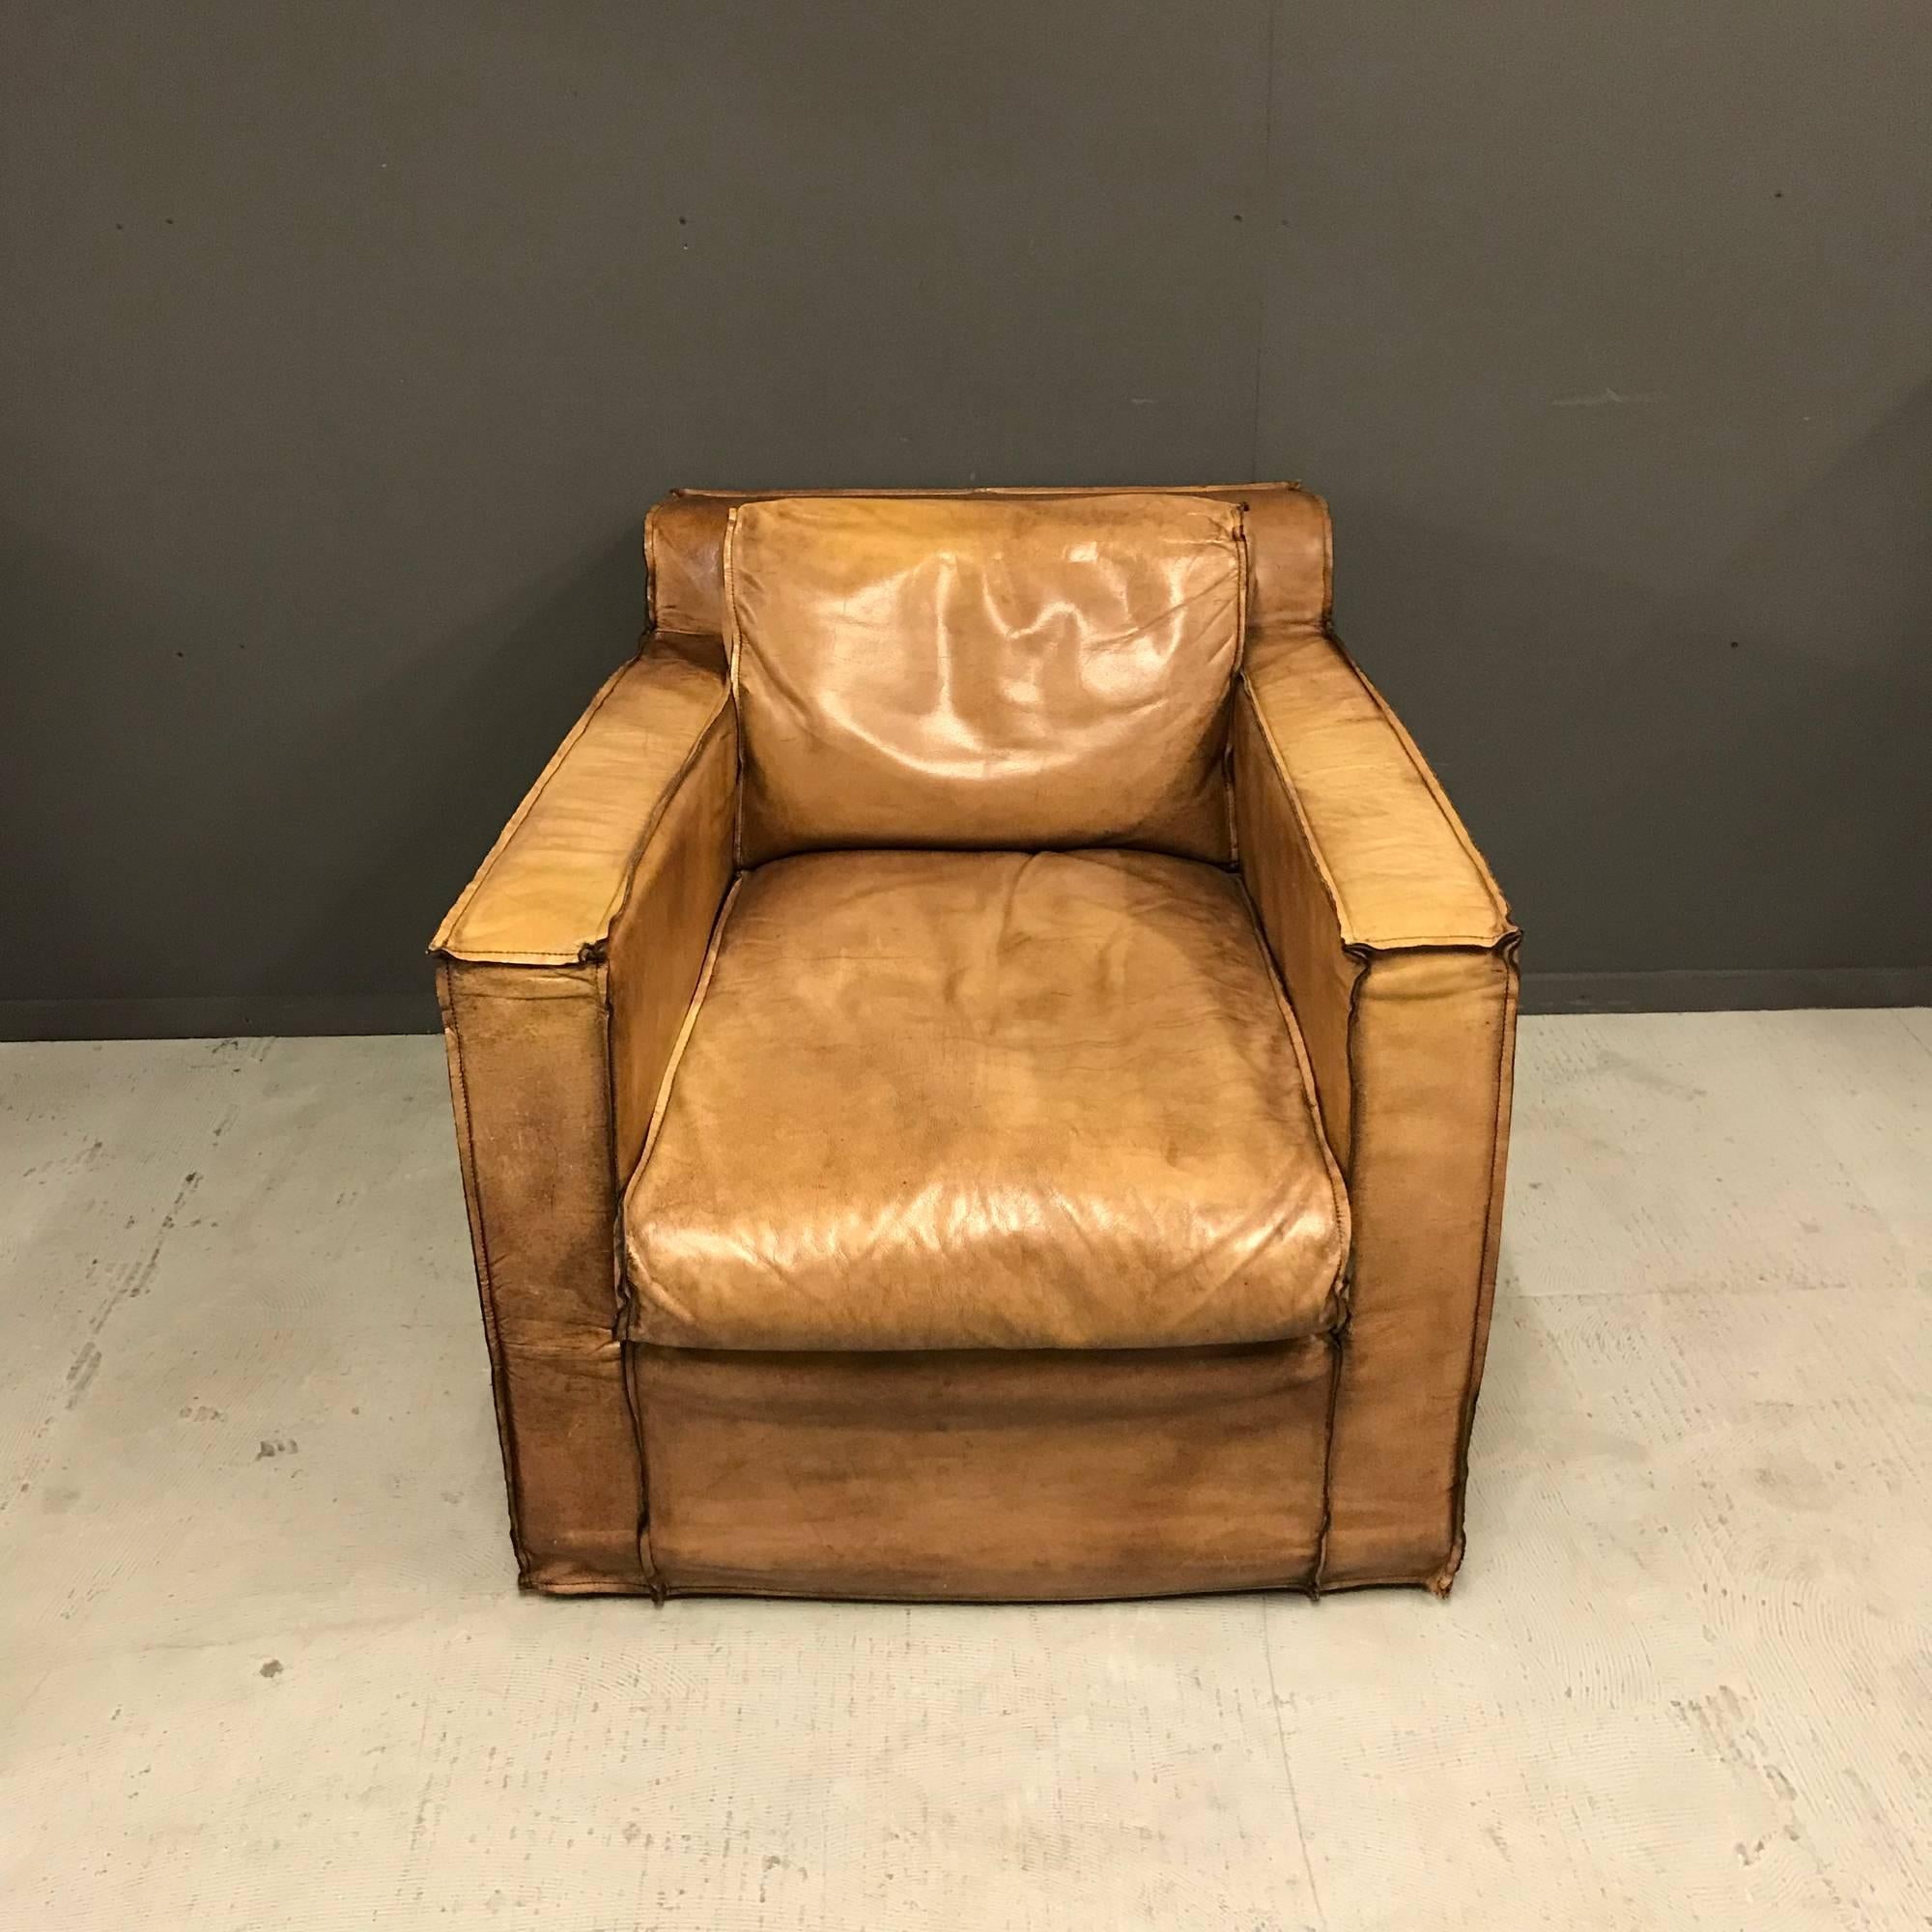 Cognac collored buffalo leather armchair. Unusual shape, with great comfort. This armchair remains in good condition.